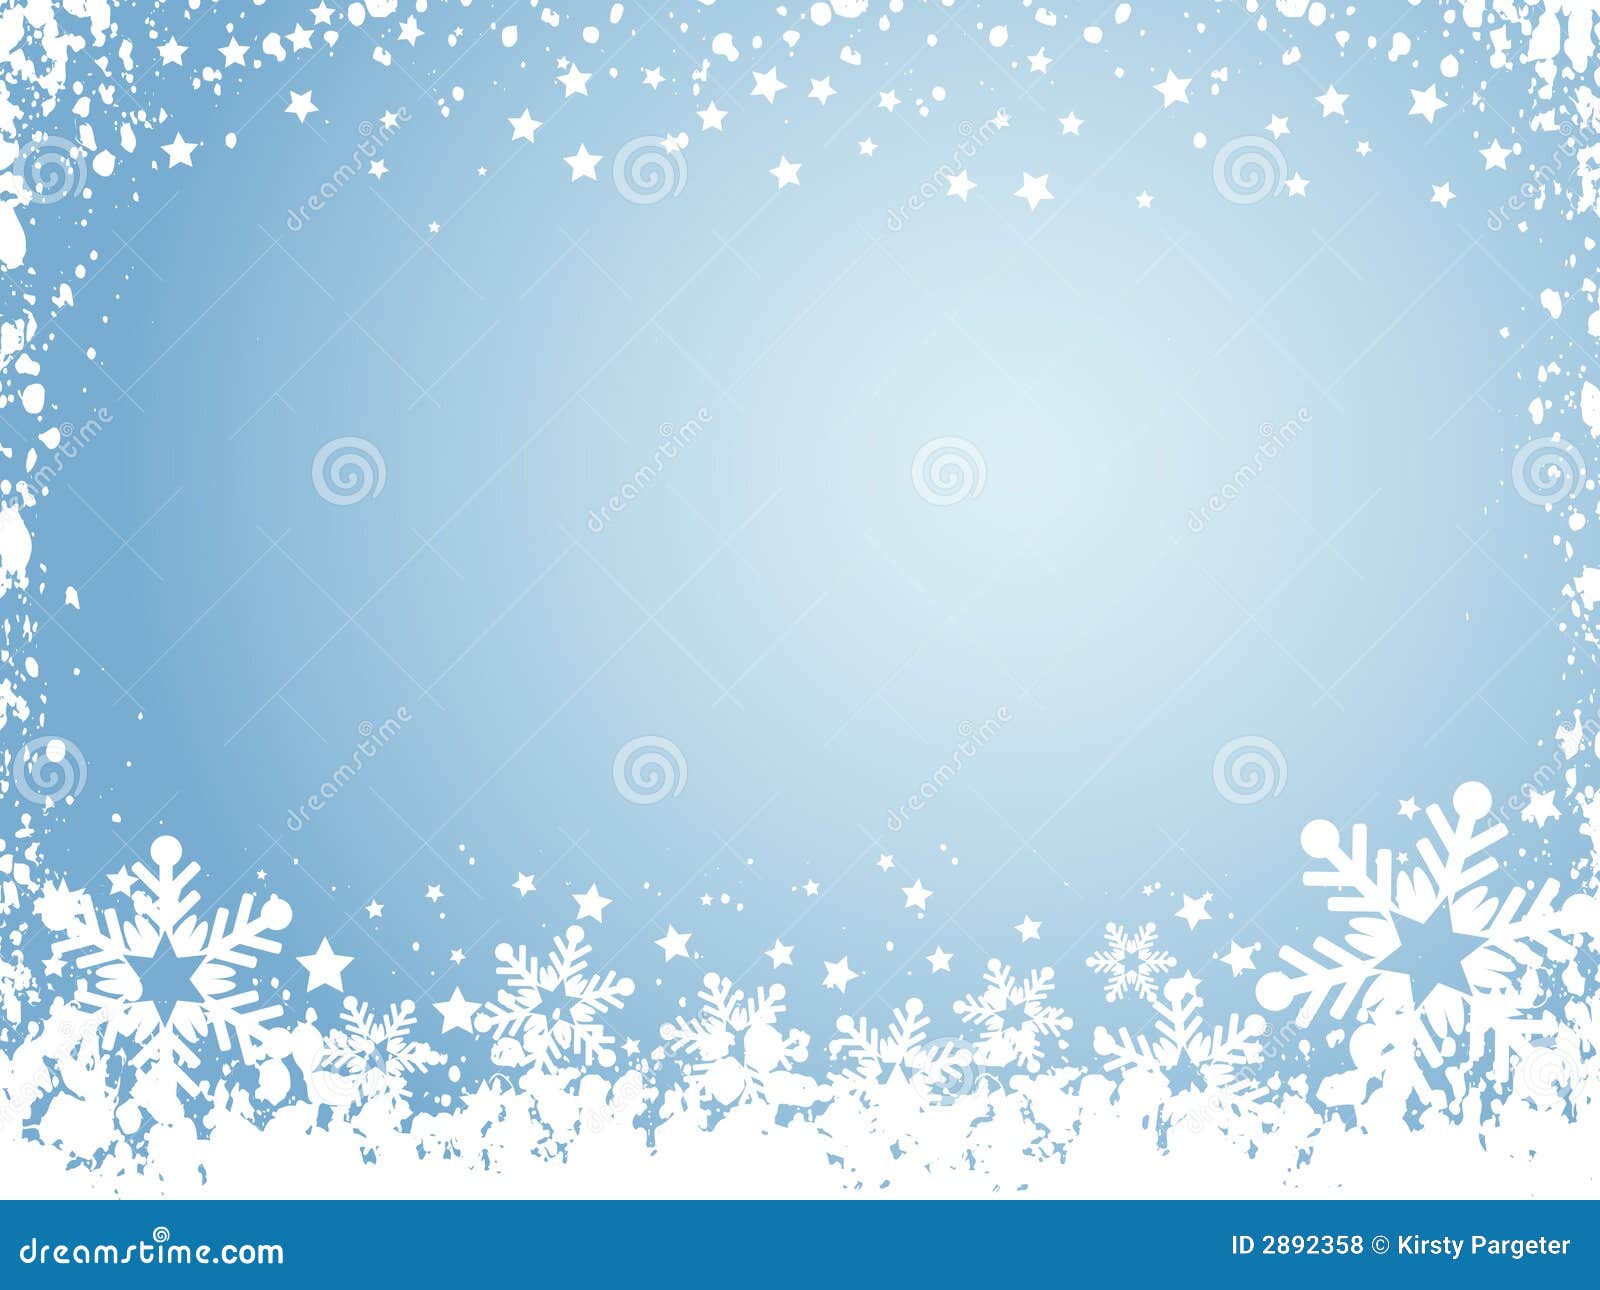 snow background clipart - photo #43